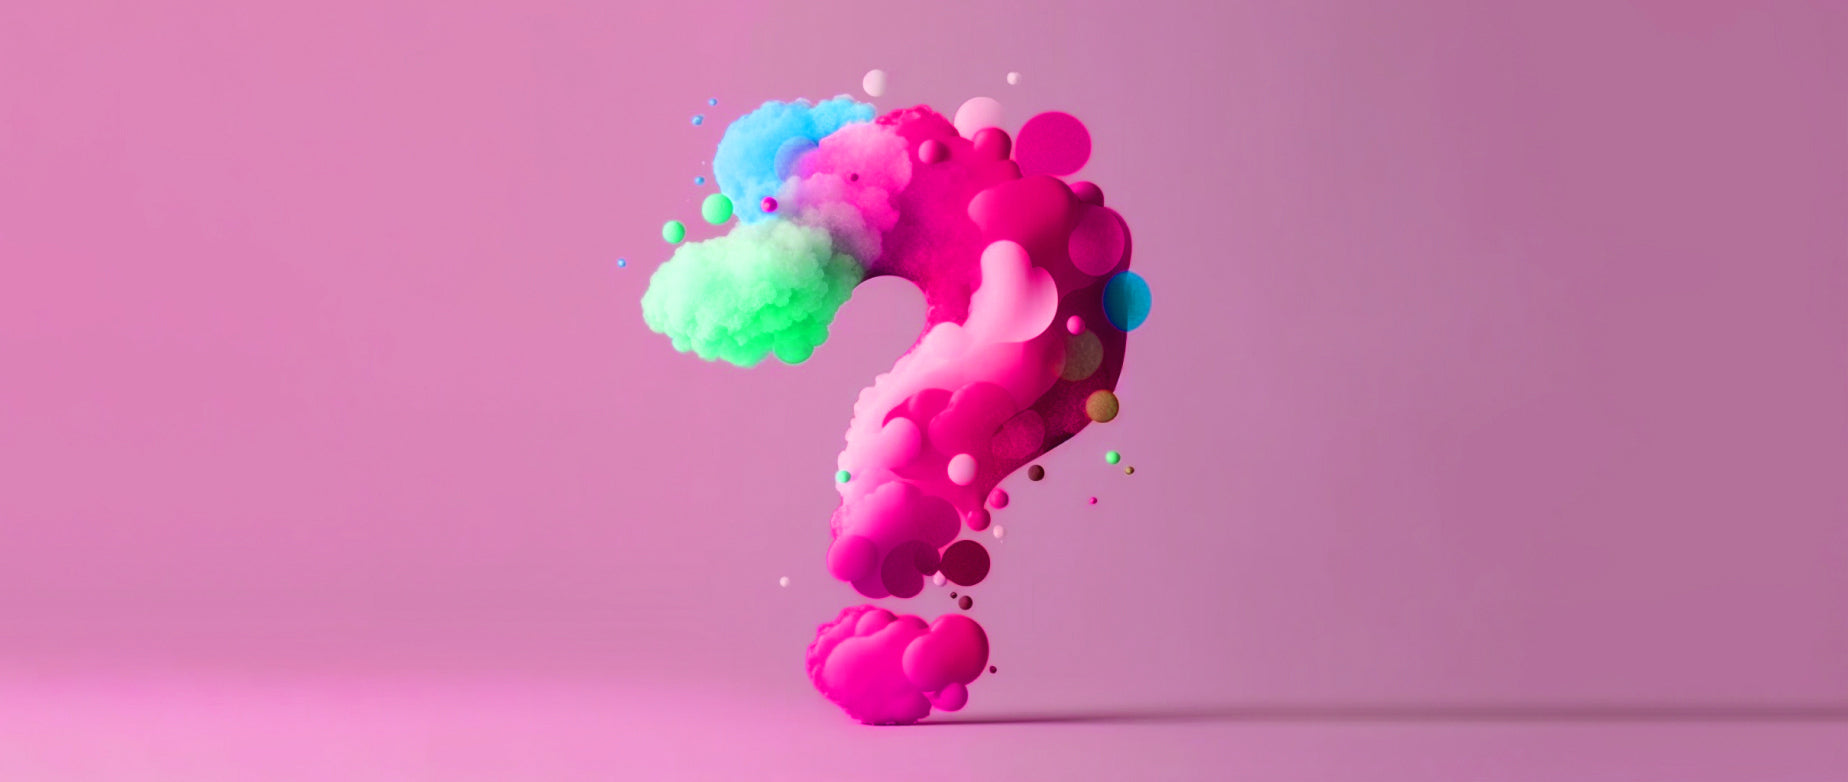 a question mark made of bright fluffy clouds on a pink background